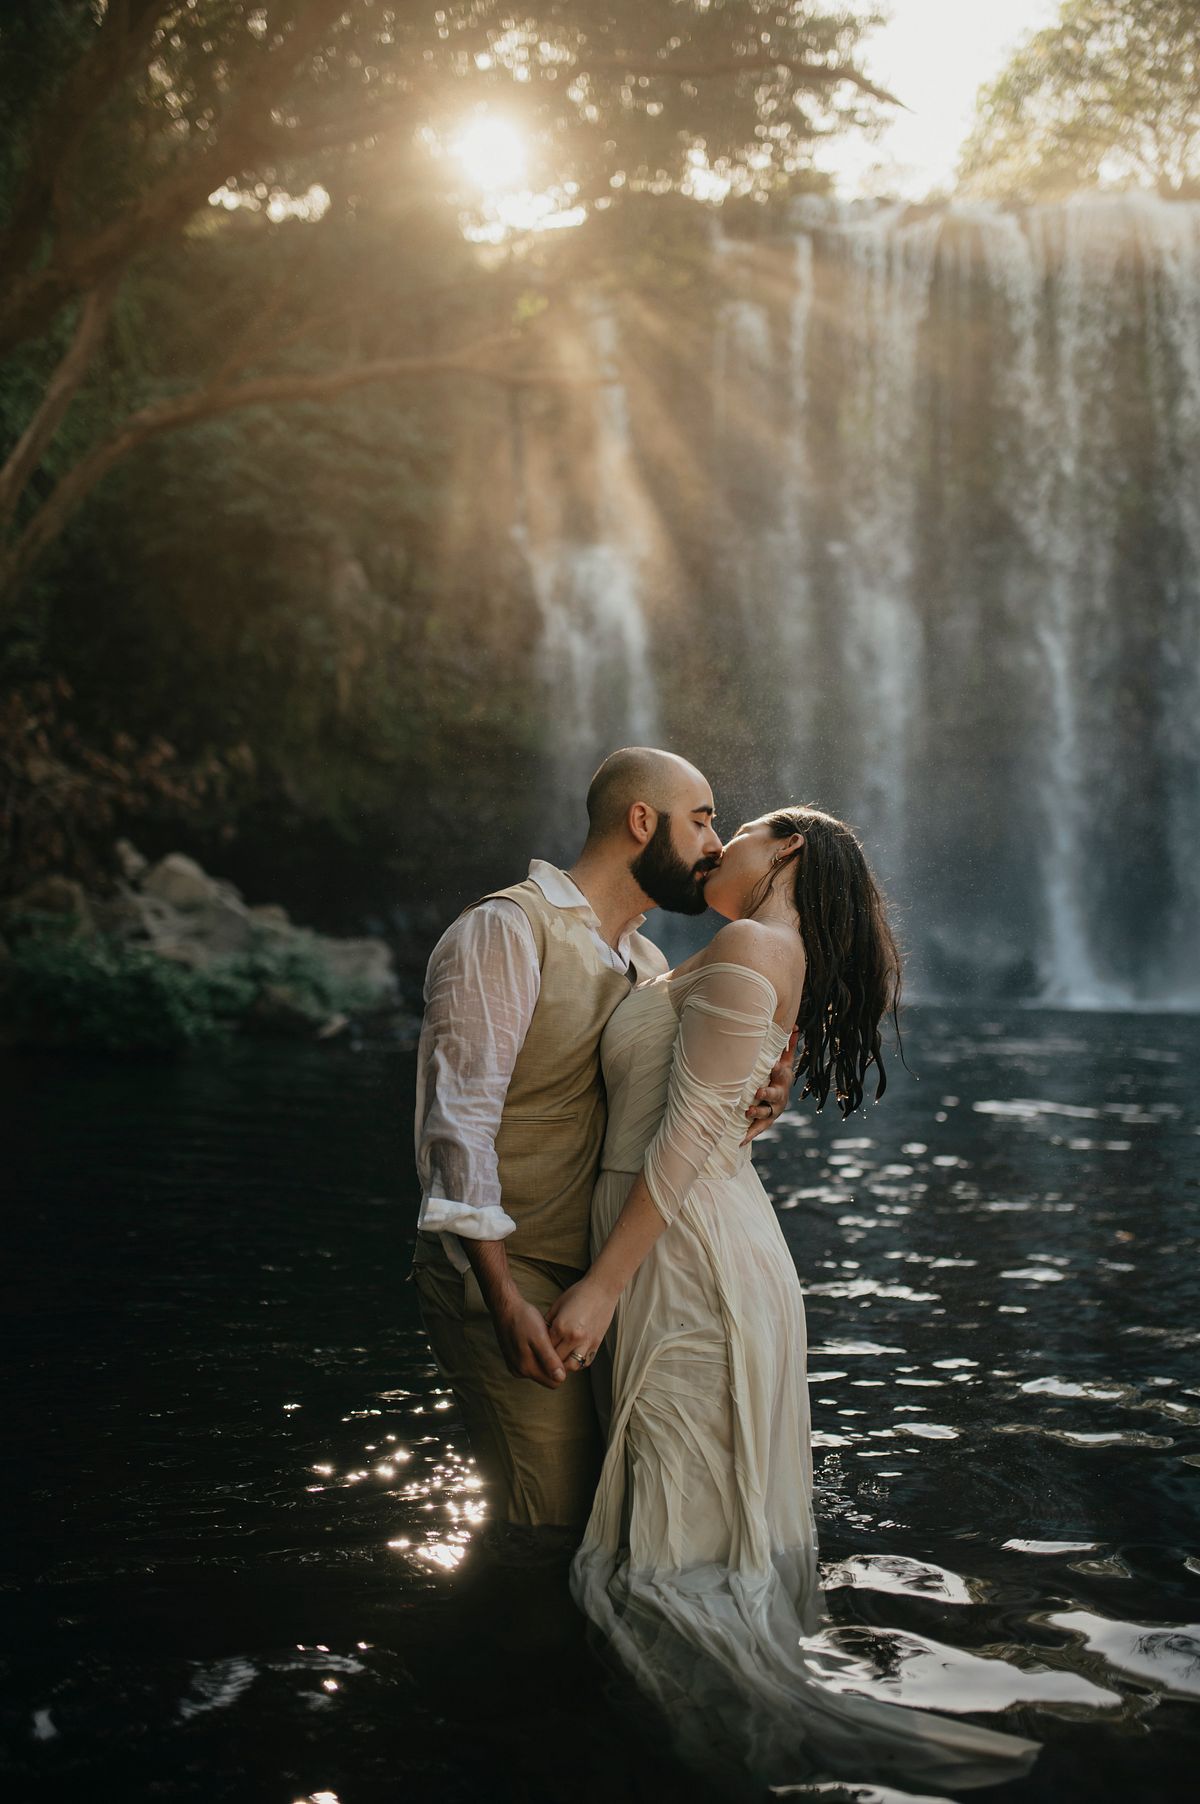 Stunning Costa Rican Backdrop: Newlyweds Share a Beautiful Kiss in the Water During Their Photoshoot